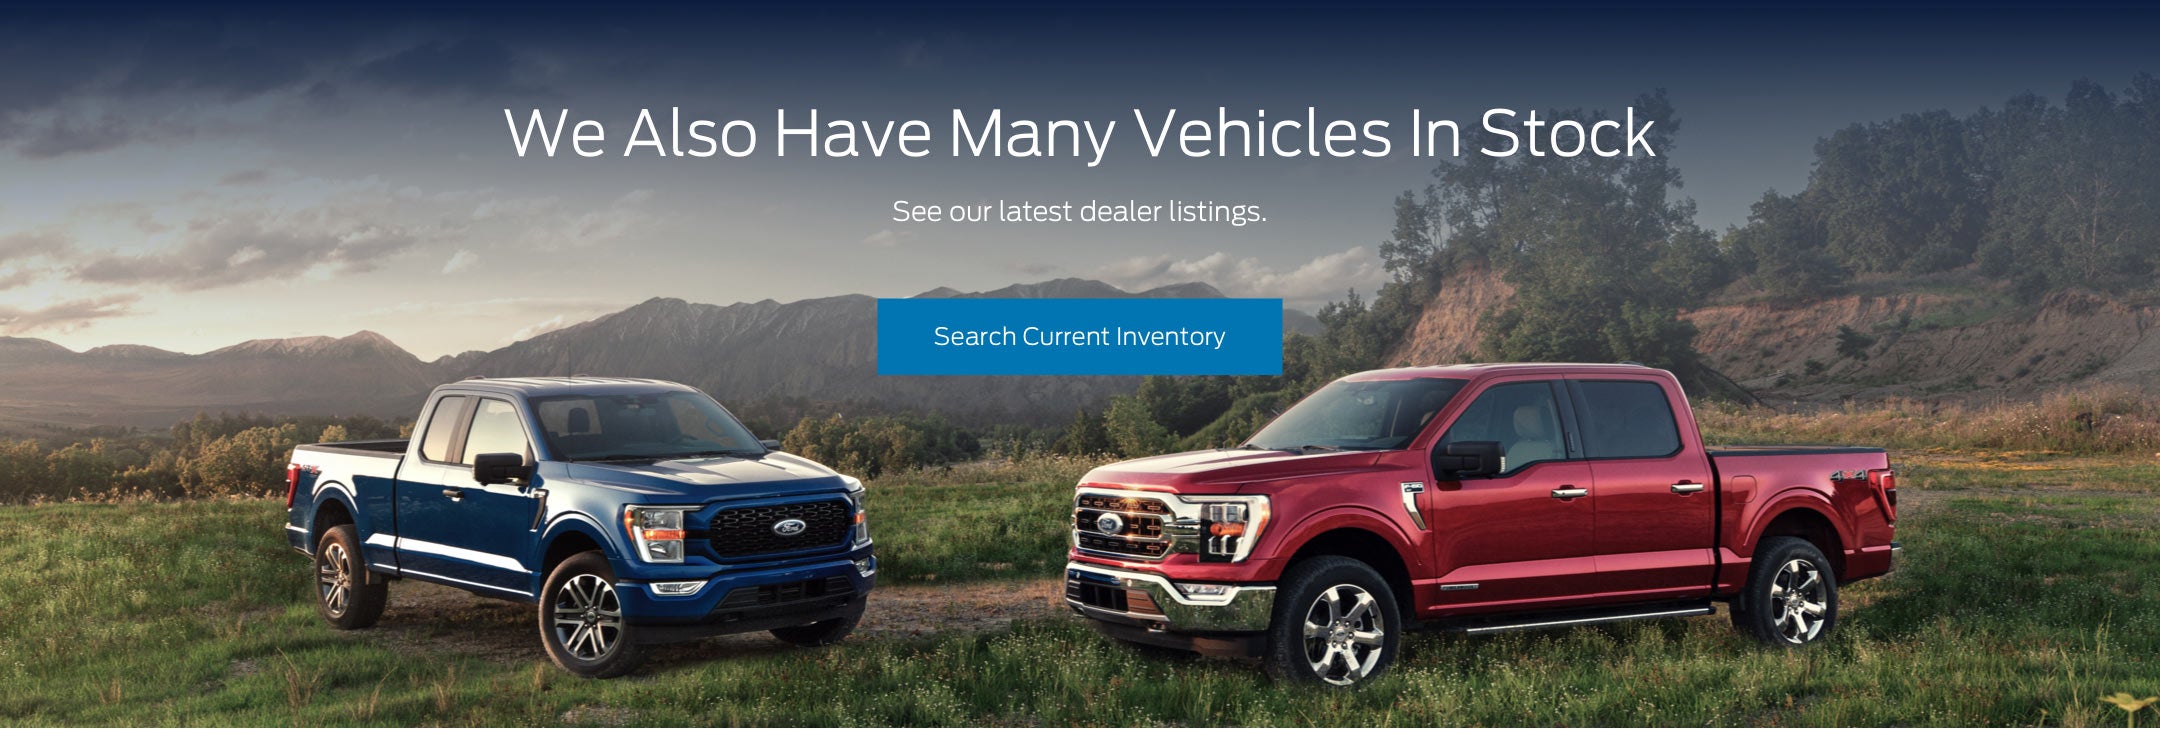 Ford vehicles in stock | Will Tiesiera Ford in Tulare CA